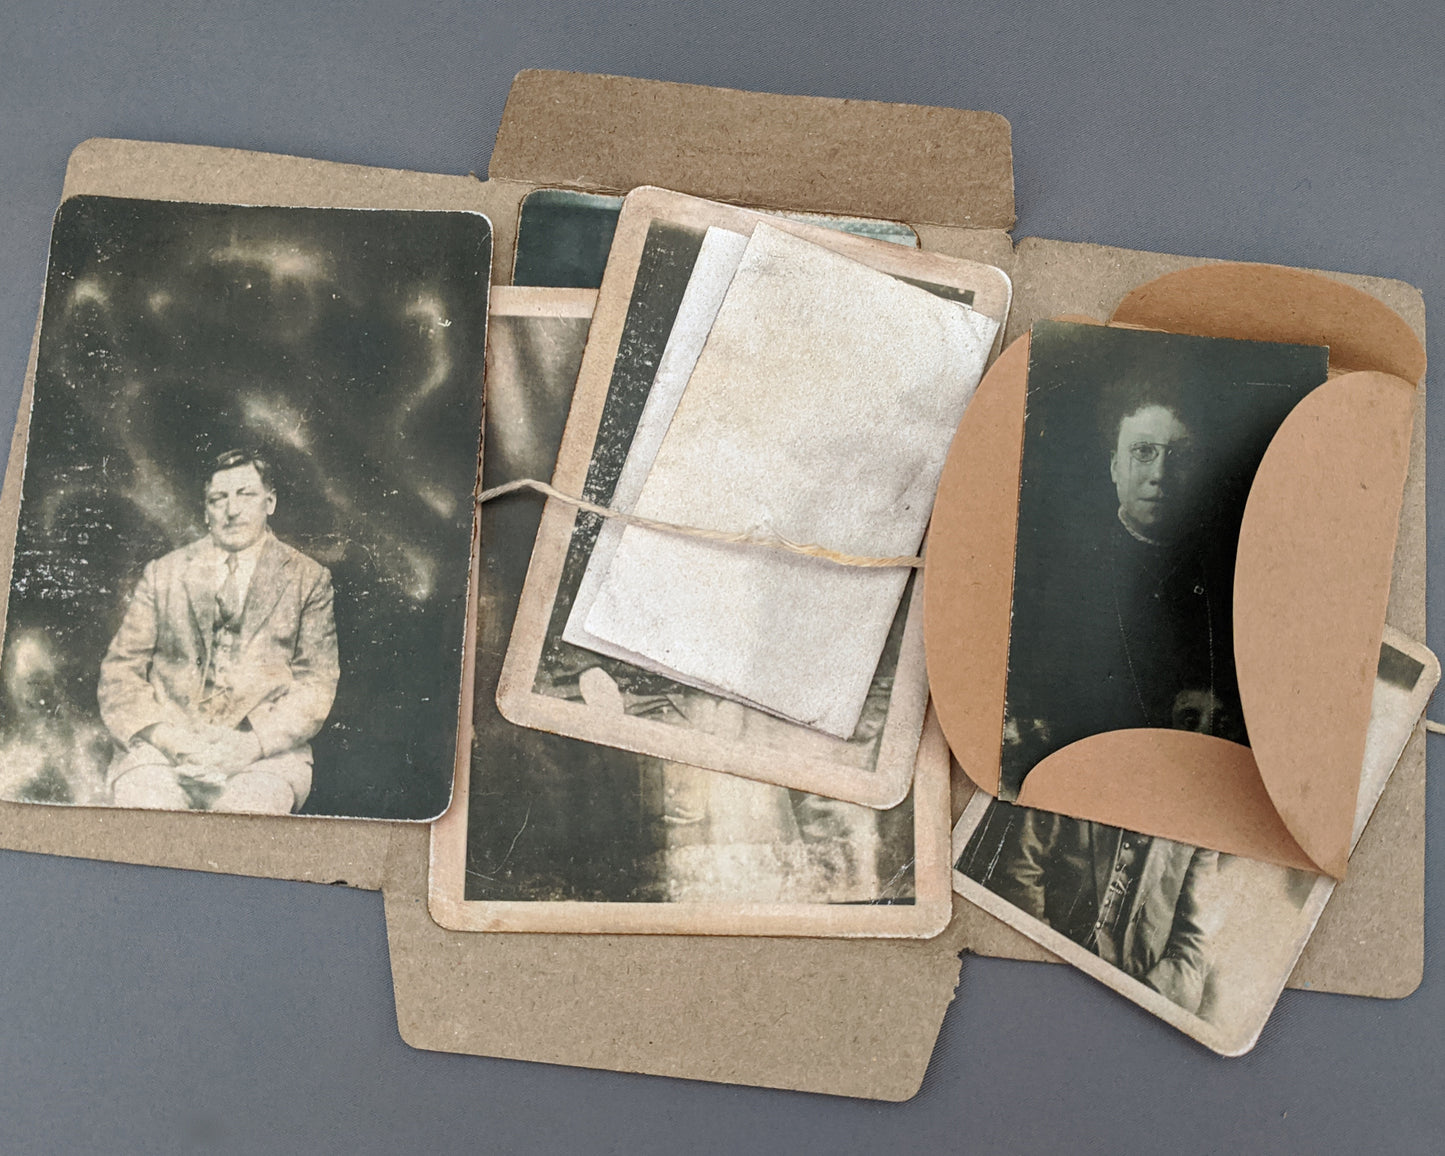 Spirit Photography (I) - Collection of Ghost Photos